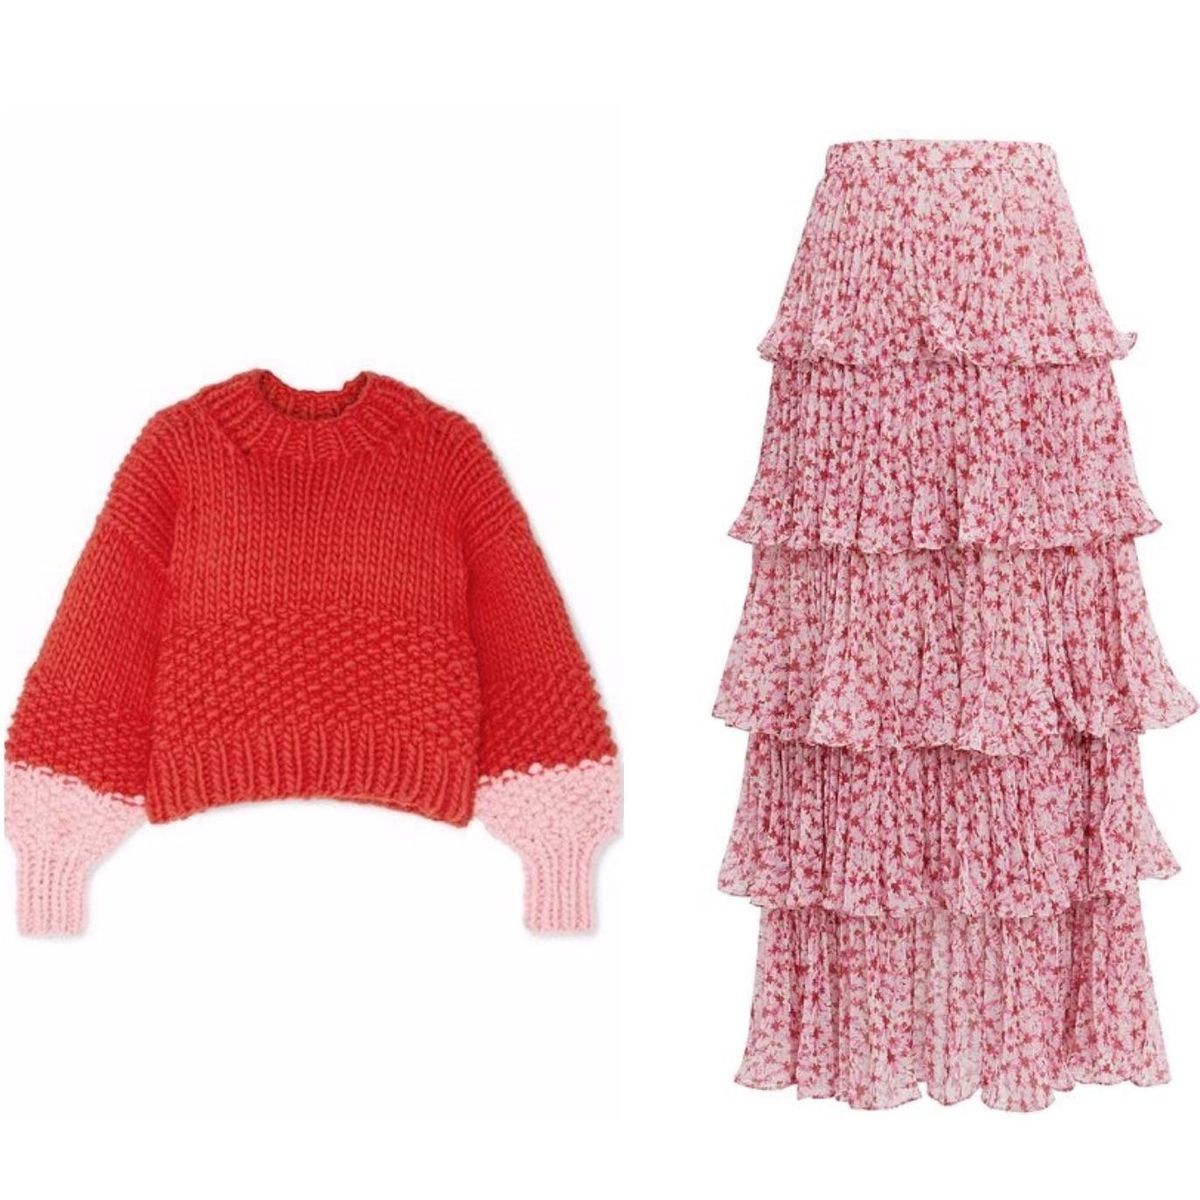 13 Oversized Sweater and Skirt Combos That Slay Winter Style